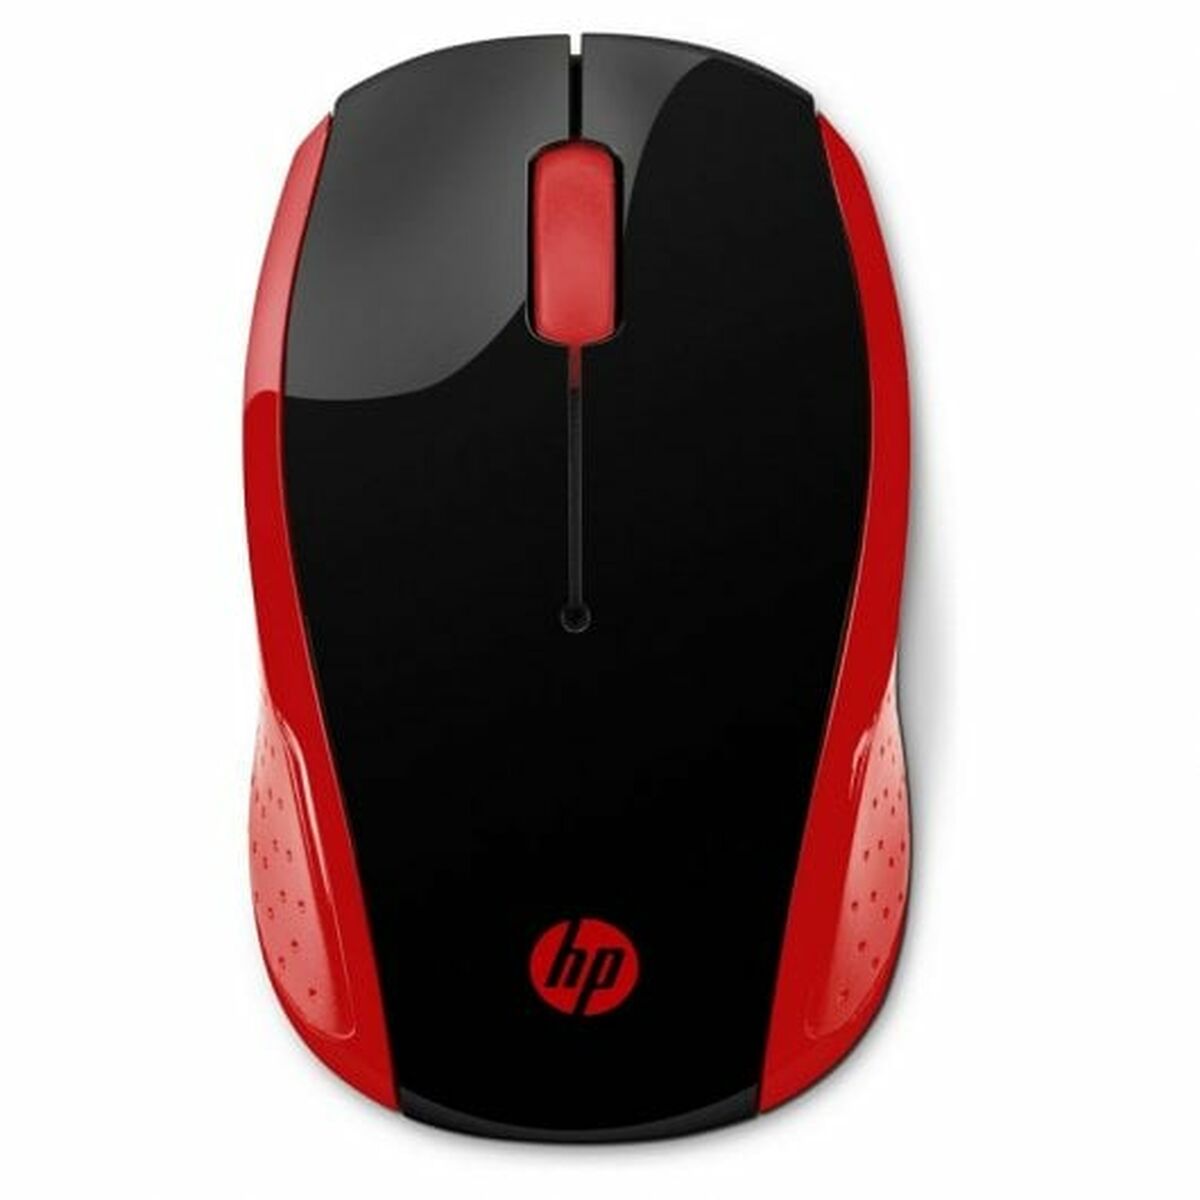 Mouse HP 2HU82AA Red Black/Red, HP, Computing, Accessories, mouse-hp-2hu82aa-red-black-red, Brand_HP, category-reference-2609, category-reference-2642, category-reference-2656, category-reference-t-19685, category-reference-t-19908, category-reference-t-21353, computers / peripherals, Condition_NEW, office, Price_20 - 50, Teleworking, RiotNook